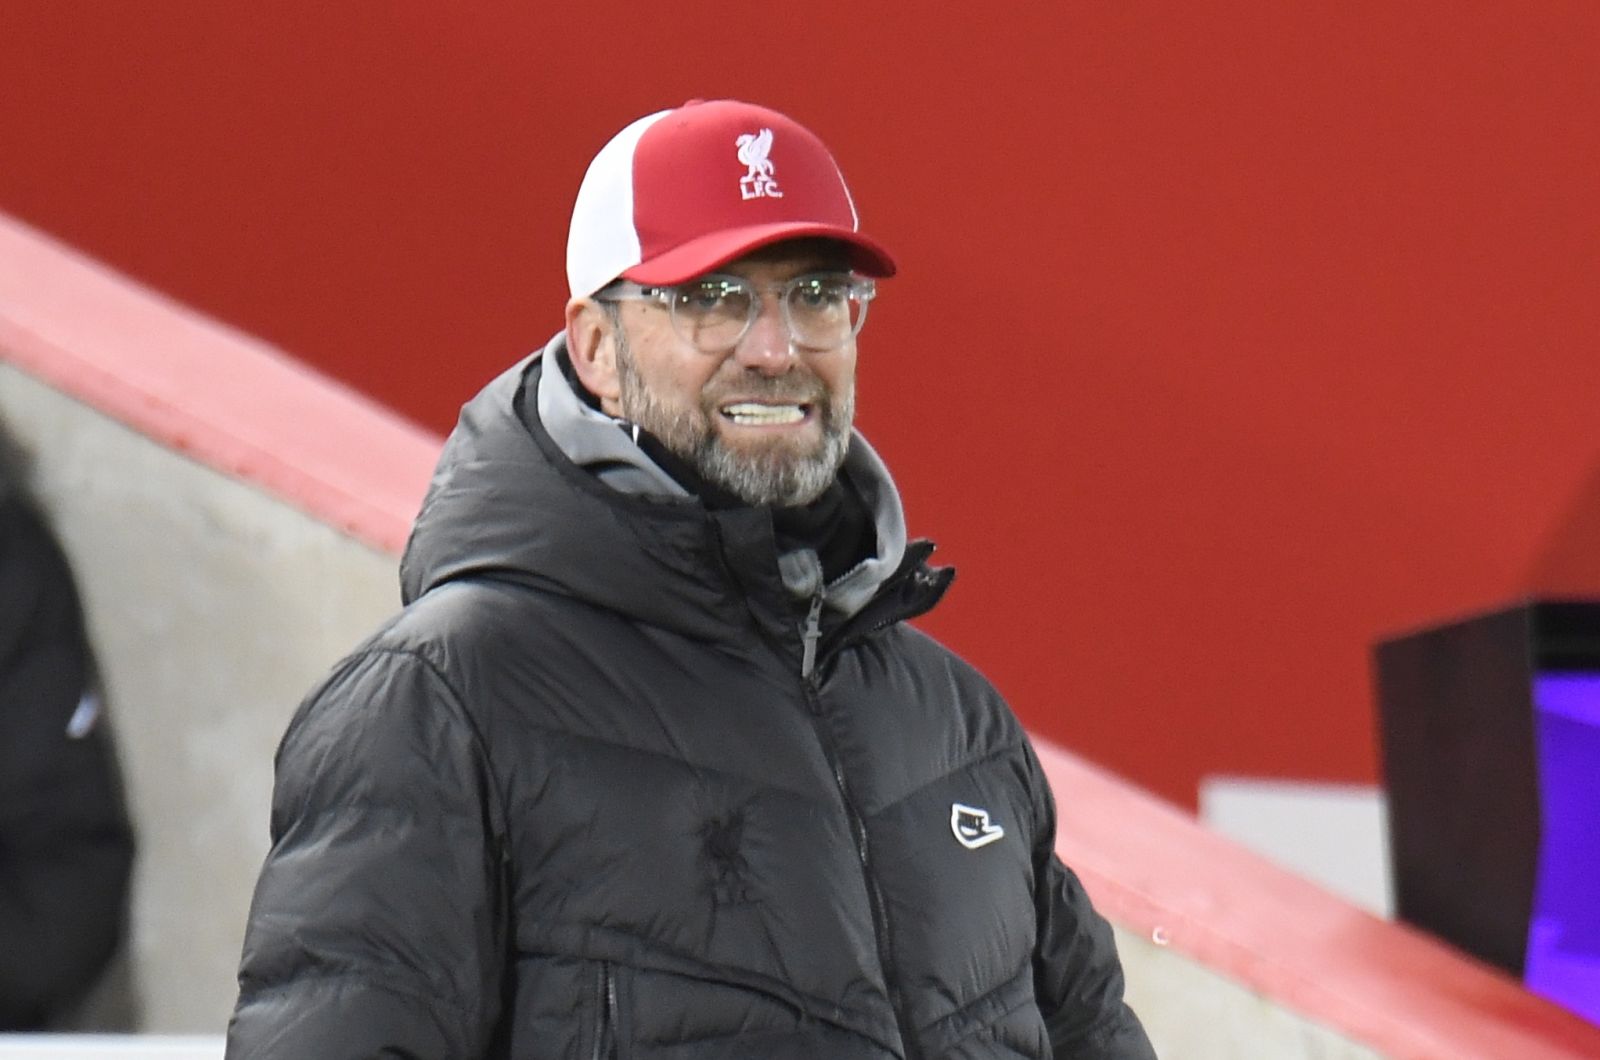 epa08956622 Liverpool's manager Juergen Klopp reacts during the English Premier League soccer match between Liverpool FC and Burnley FC in Liverpool, Britain, 21 January 2021.  EPA/Peter Powell / POOL EDITORIAL USE ONLY. No use with unauthorized audio, video, data, fixture lists, club/league logos or 'live' services. Online in-match use limited to 120 images, no video emulation. No use in betting, games or single club/league/player publications.